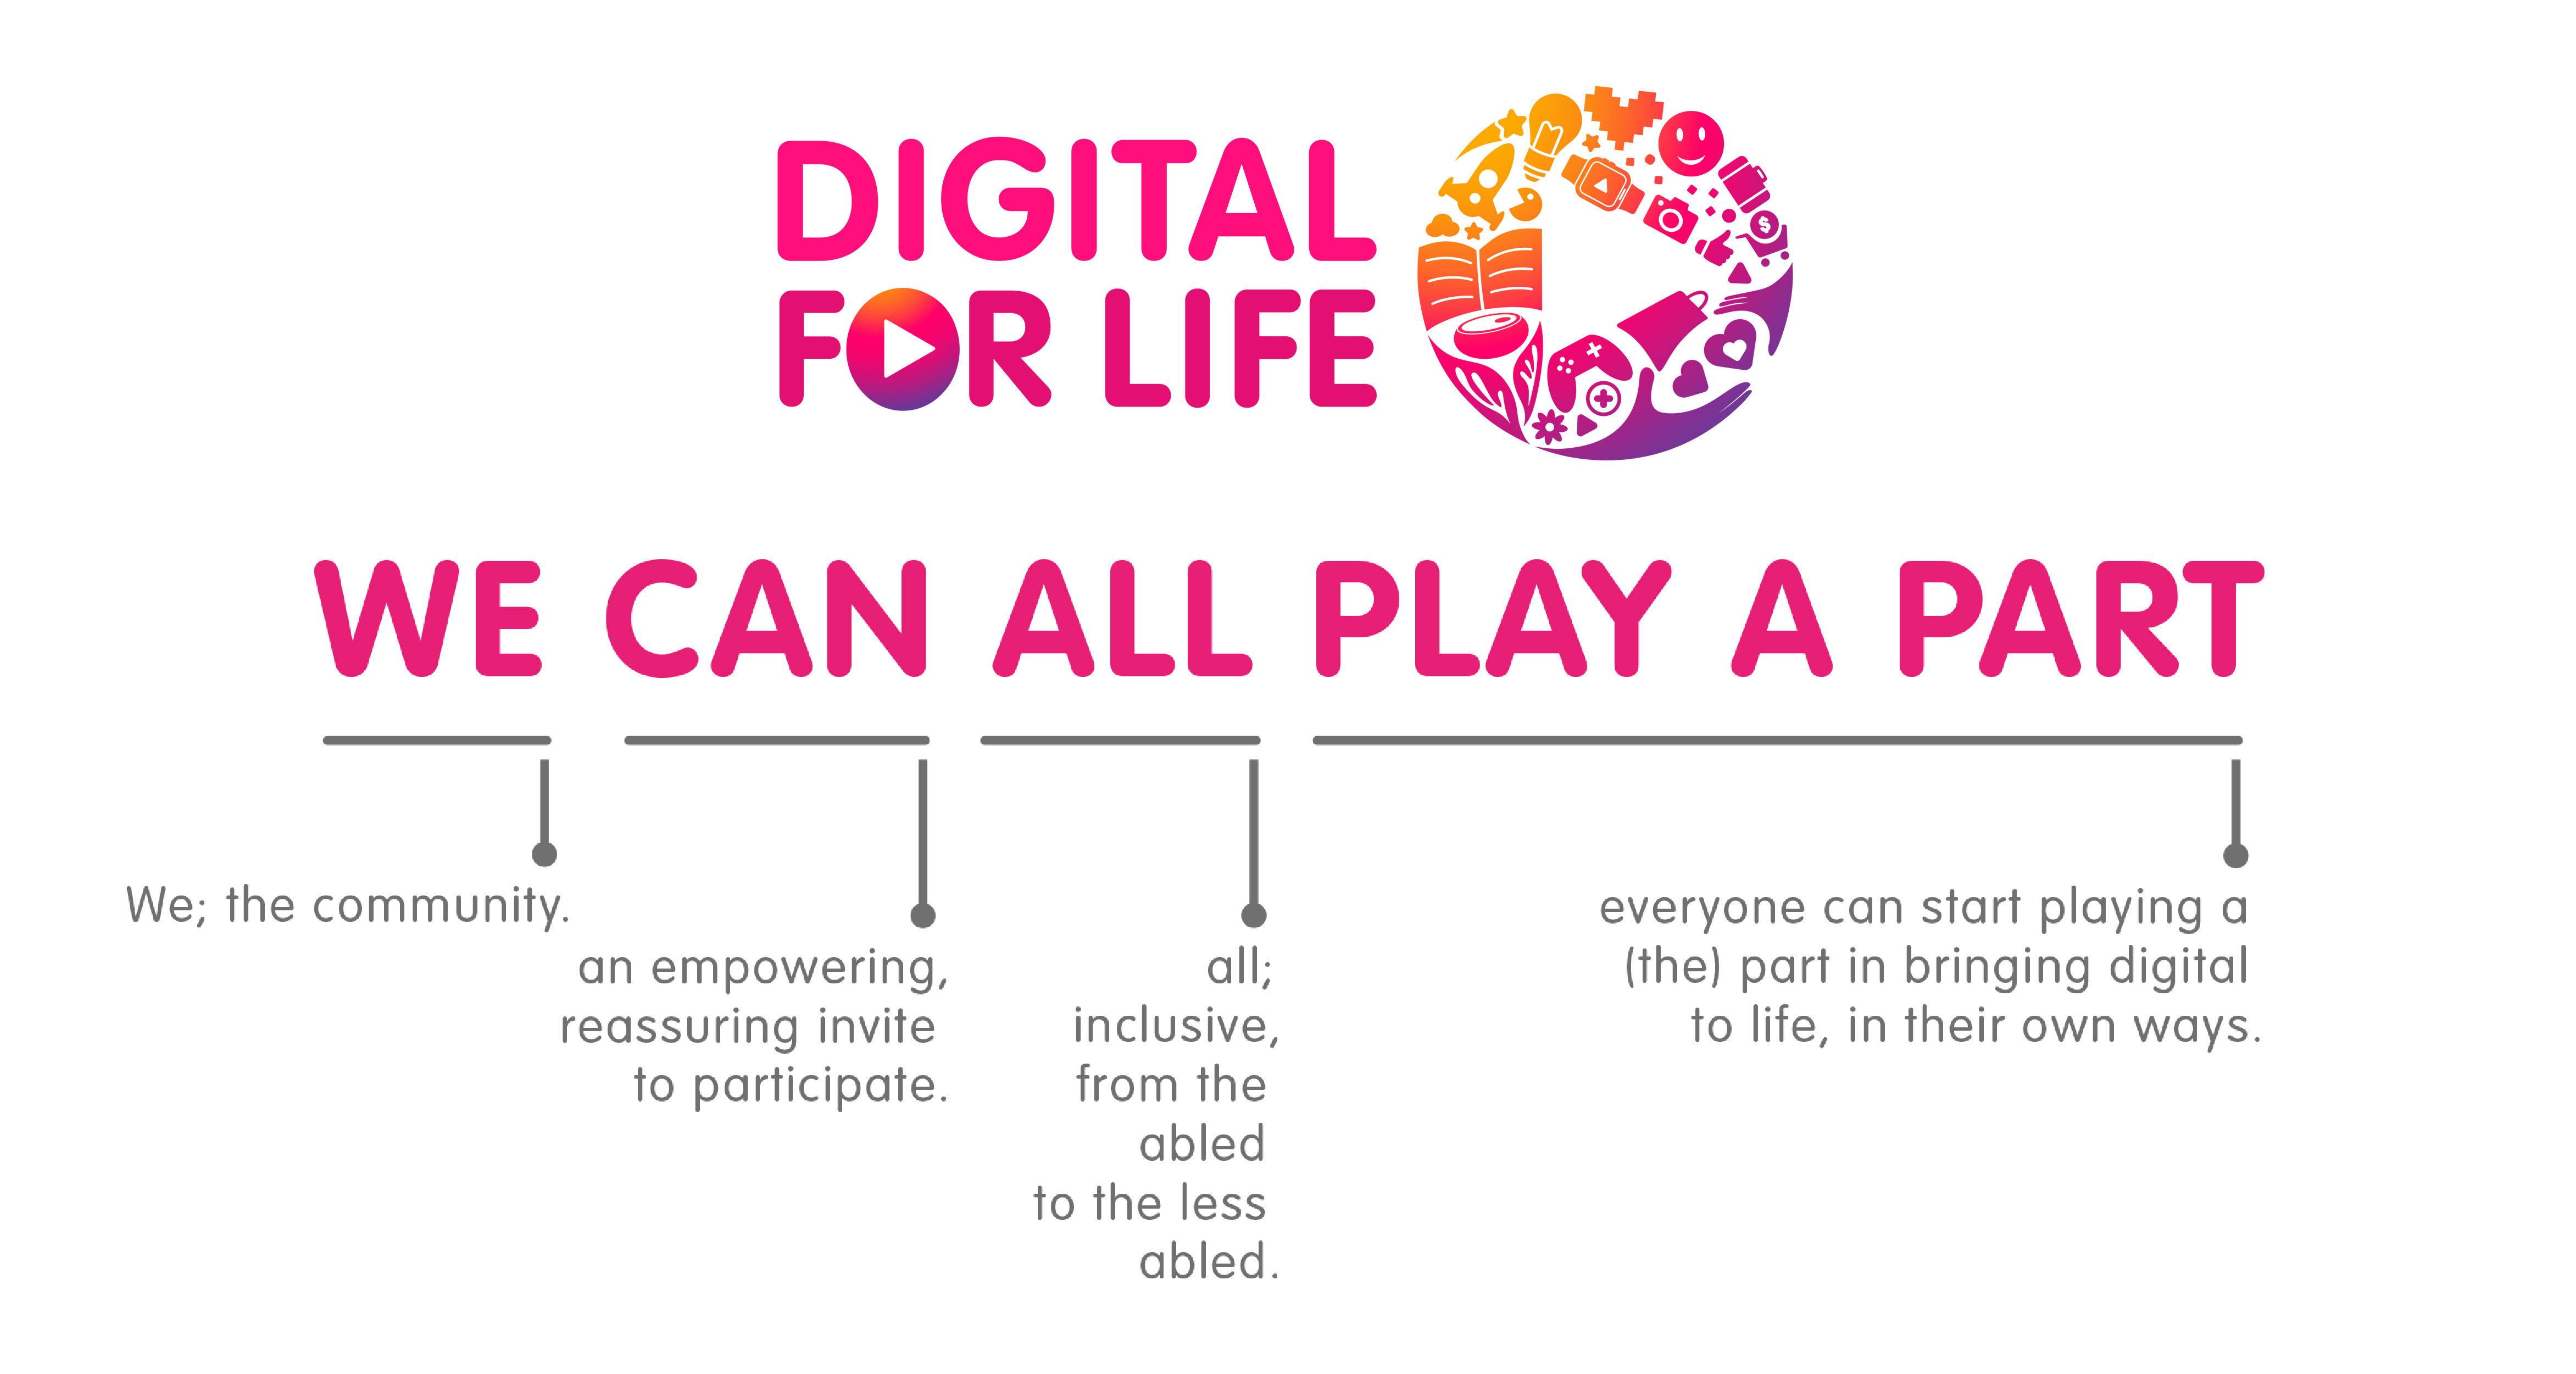 The Digital For Life (DFL) logo and illustrations on how the community can play their part